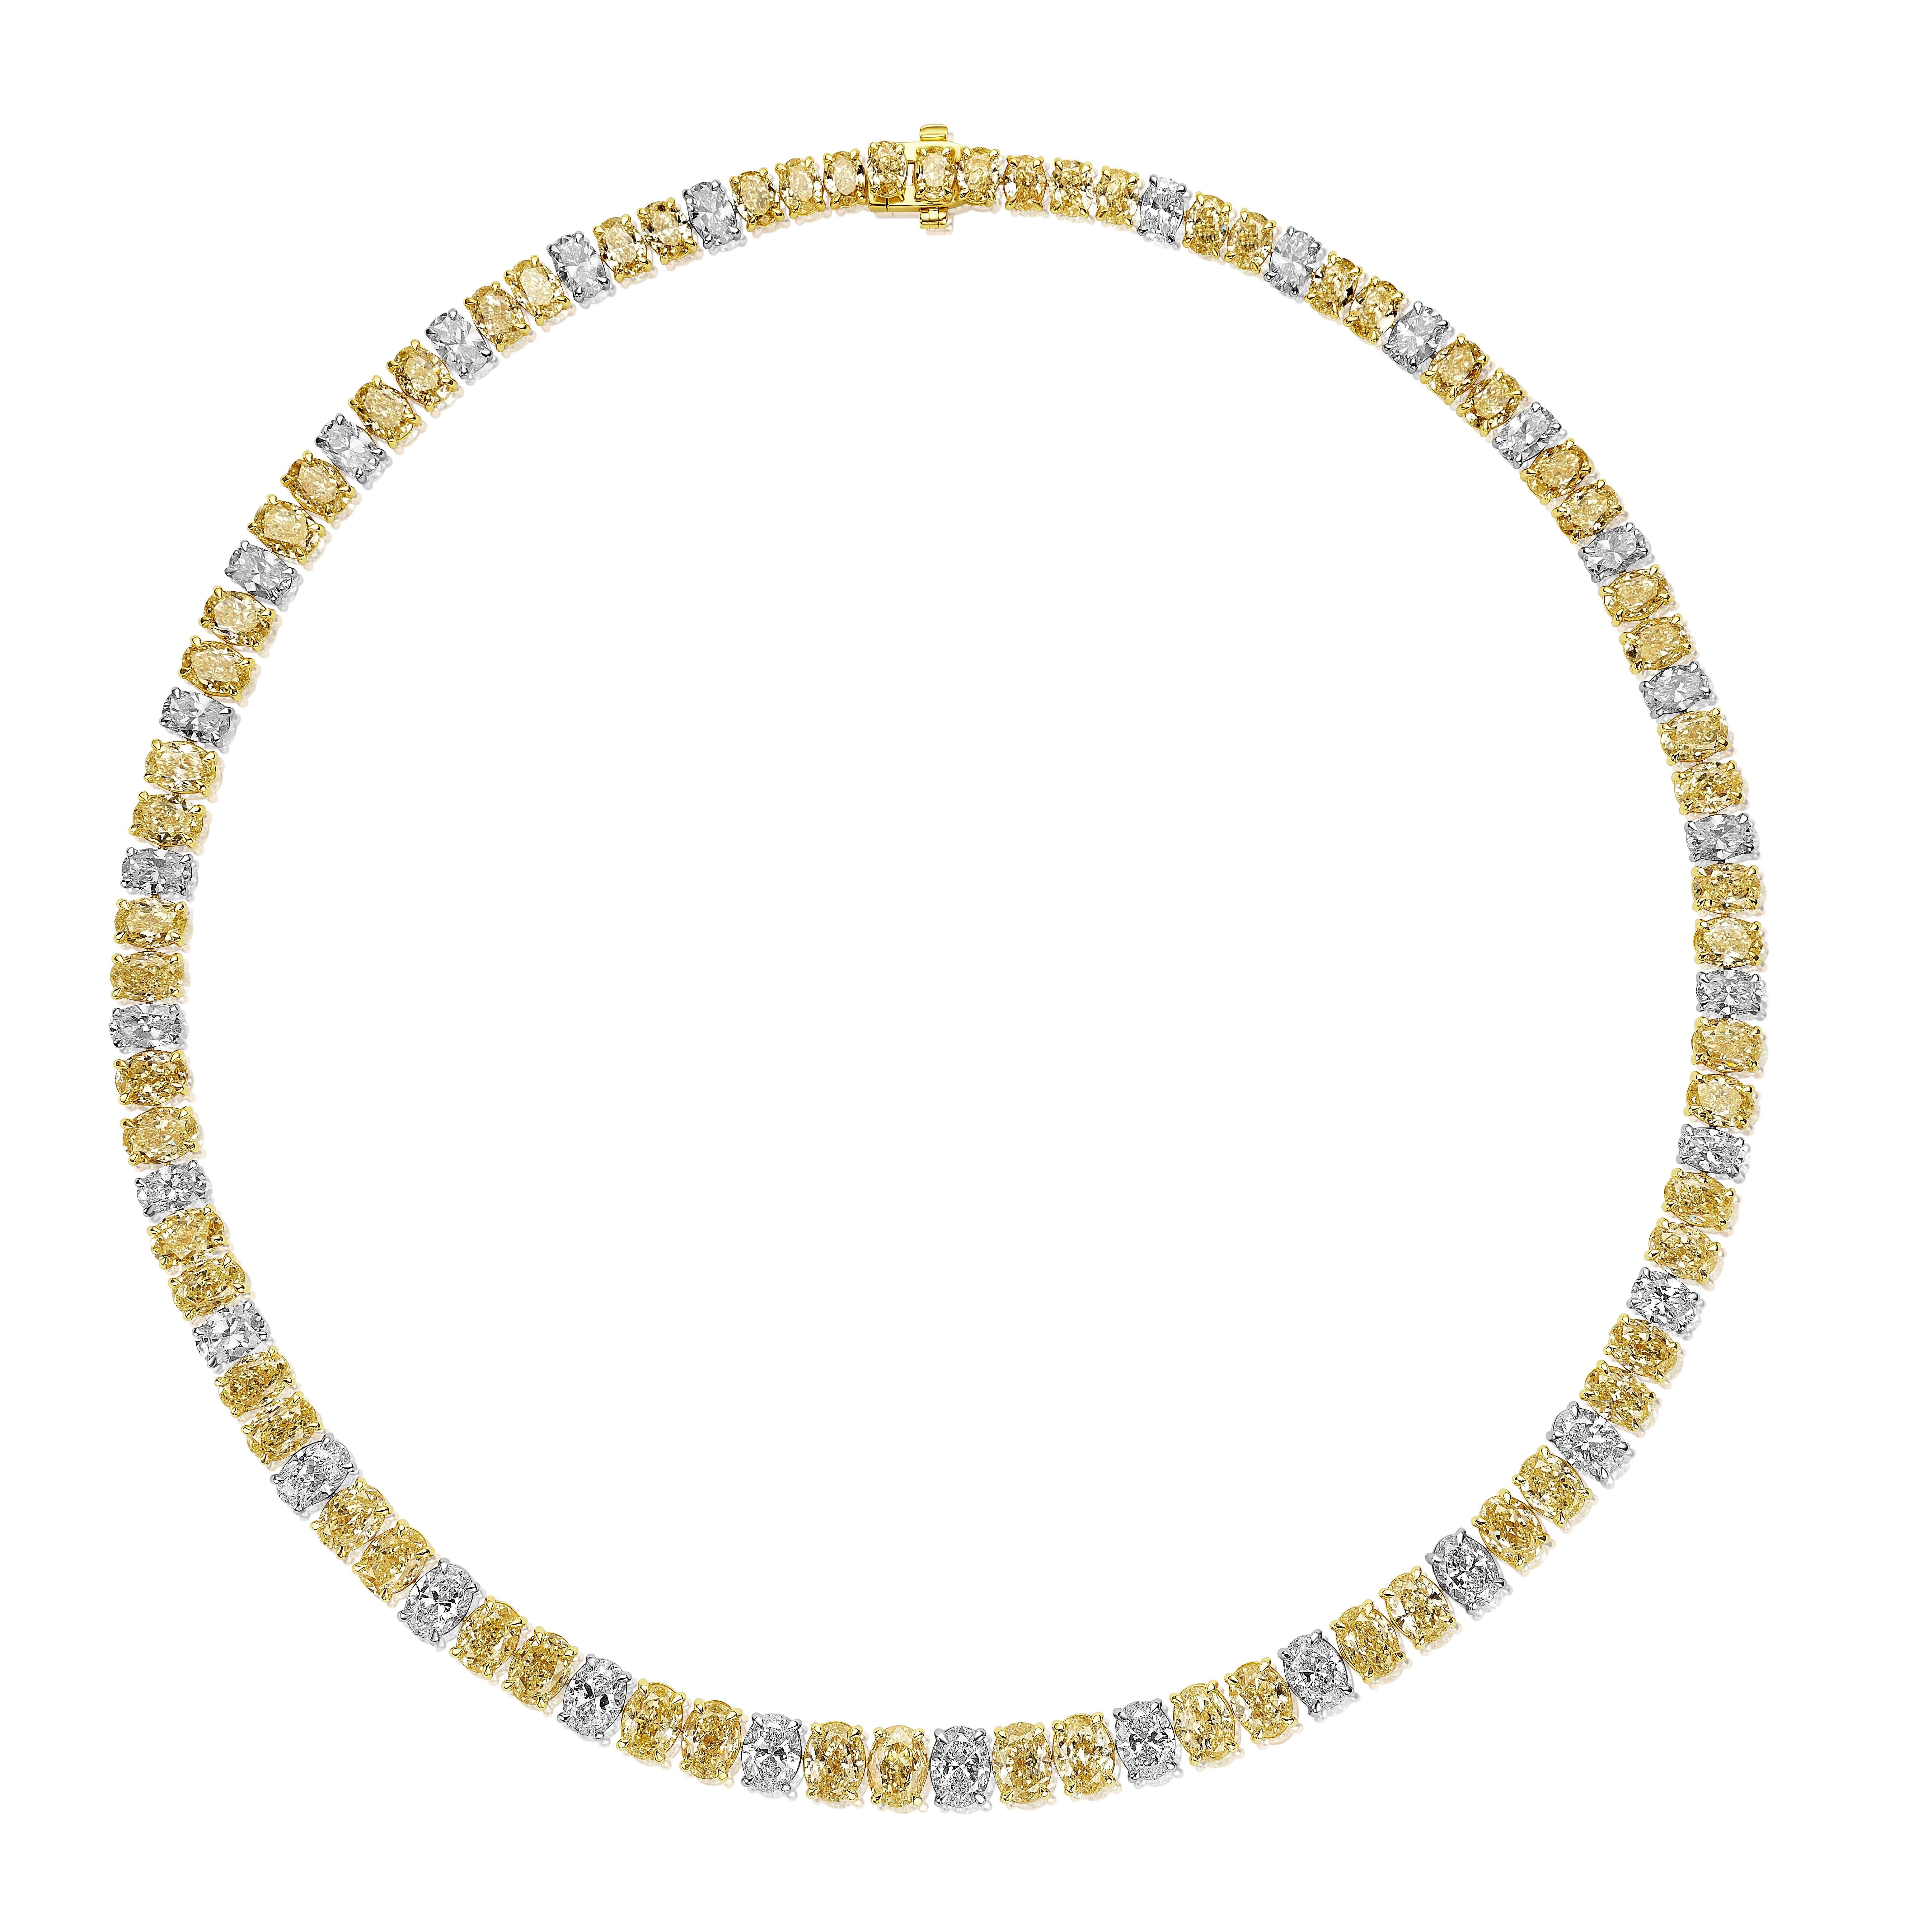 Gorgeous necklace comprised of 84 Oval Yellow and White Diamonds weighing a total of 42.40 Carats.
55 Yellow Diamonds and 29 White Diamonds.
Measures 16 inches.
Set in 18 Karat Gold.